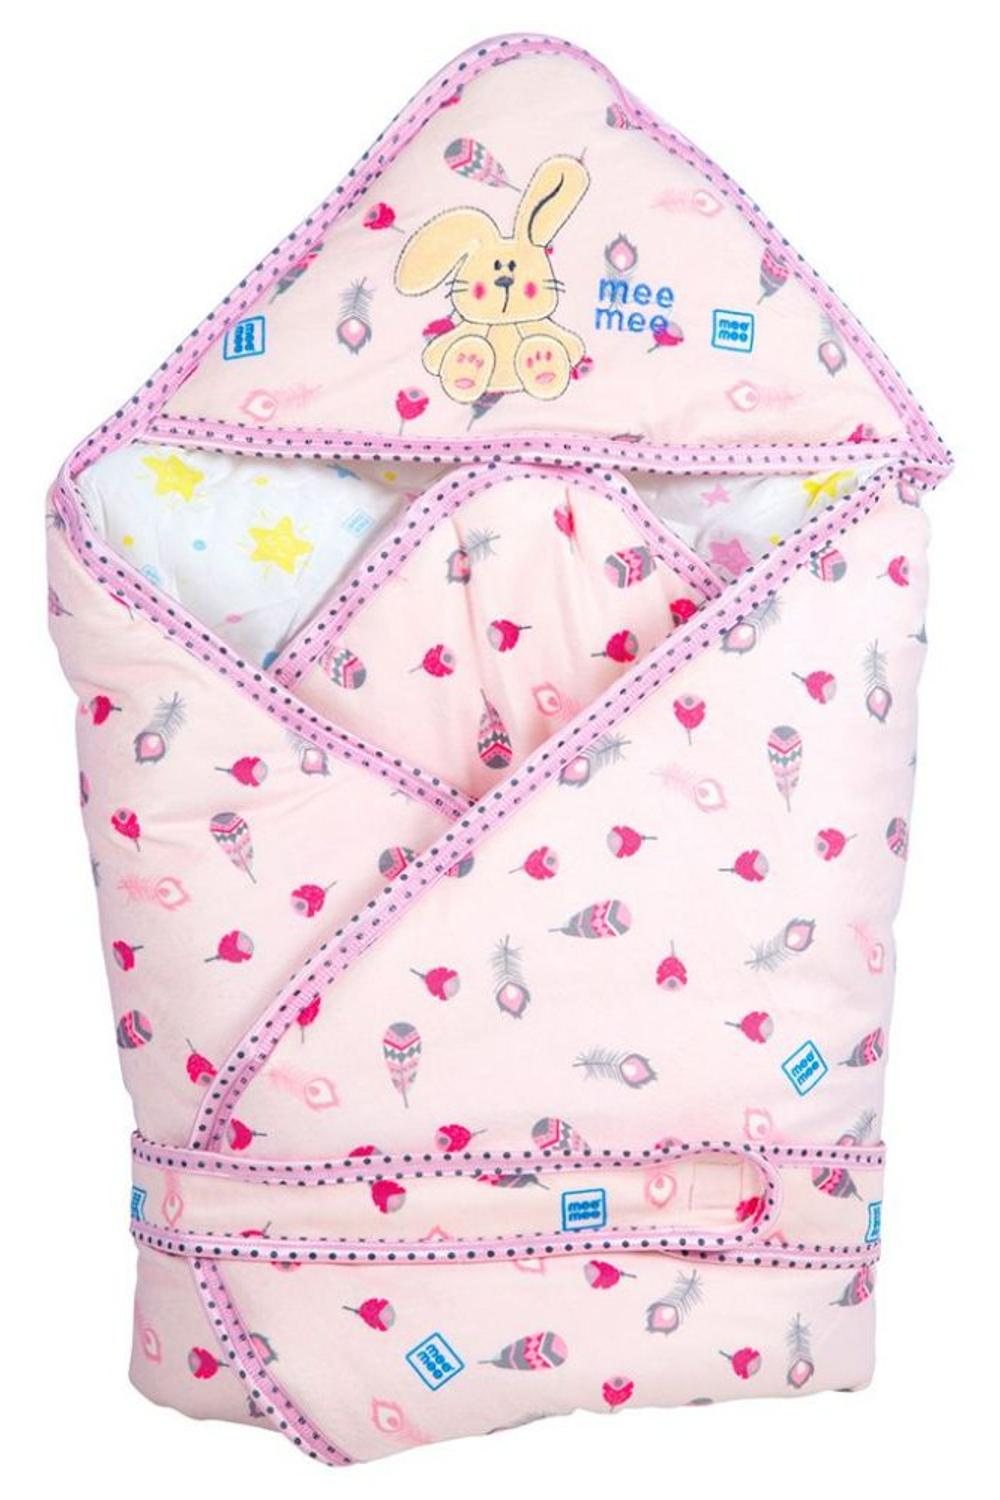 Mee Mee Baby Warm and Soft Swaddle Wrapperwith Hood Blanket for Newborn Babies (Pink-Bunny Print)